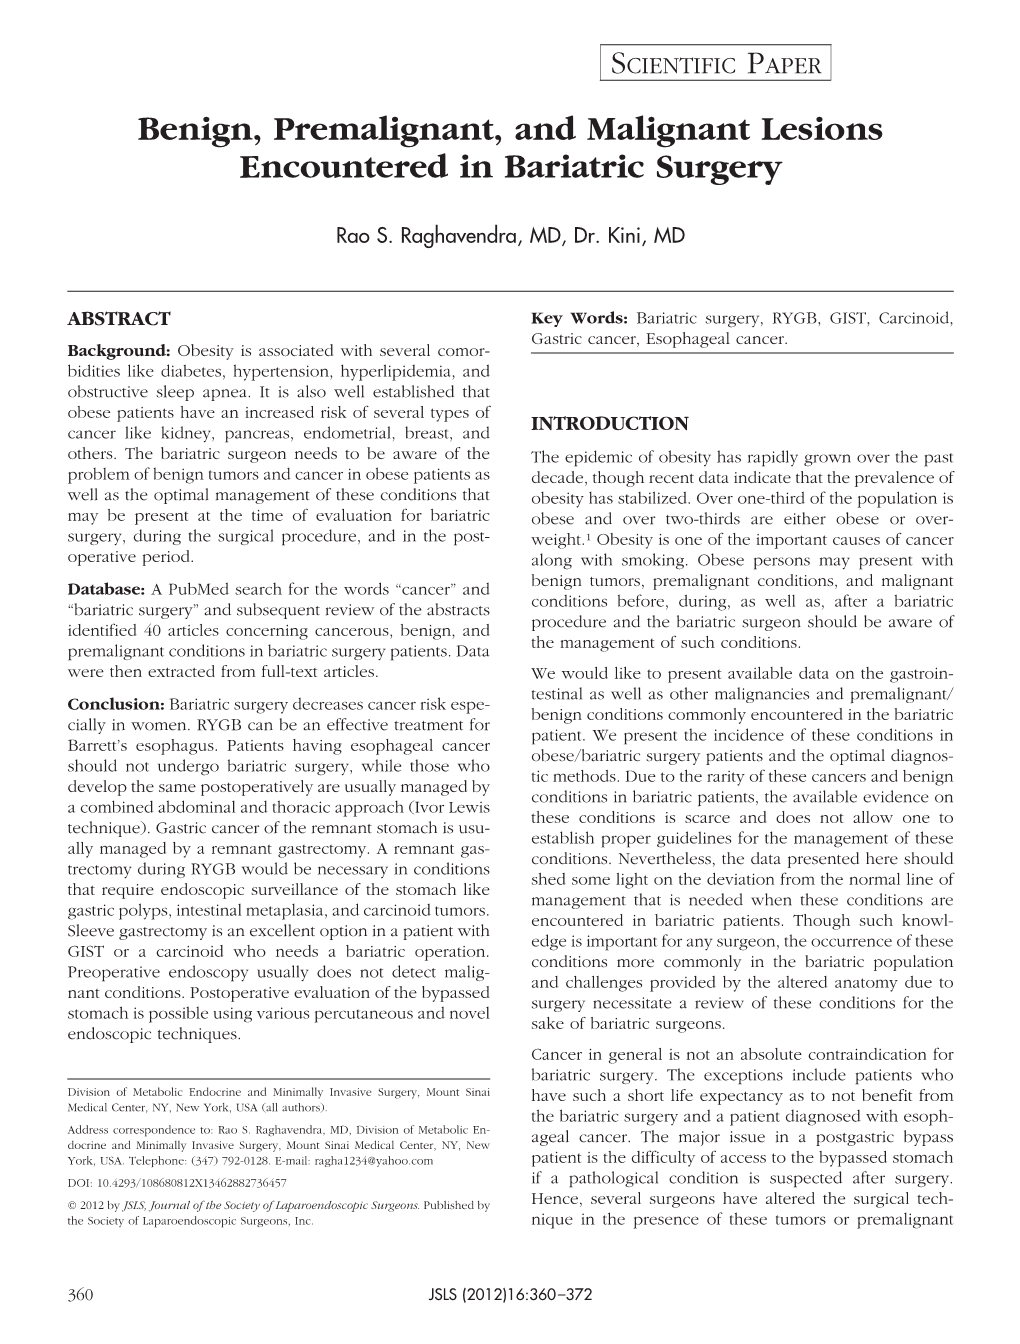 Benign, Premalignant, and Malignant Lesions Encountered in Bariatric Surgery